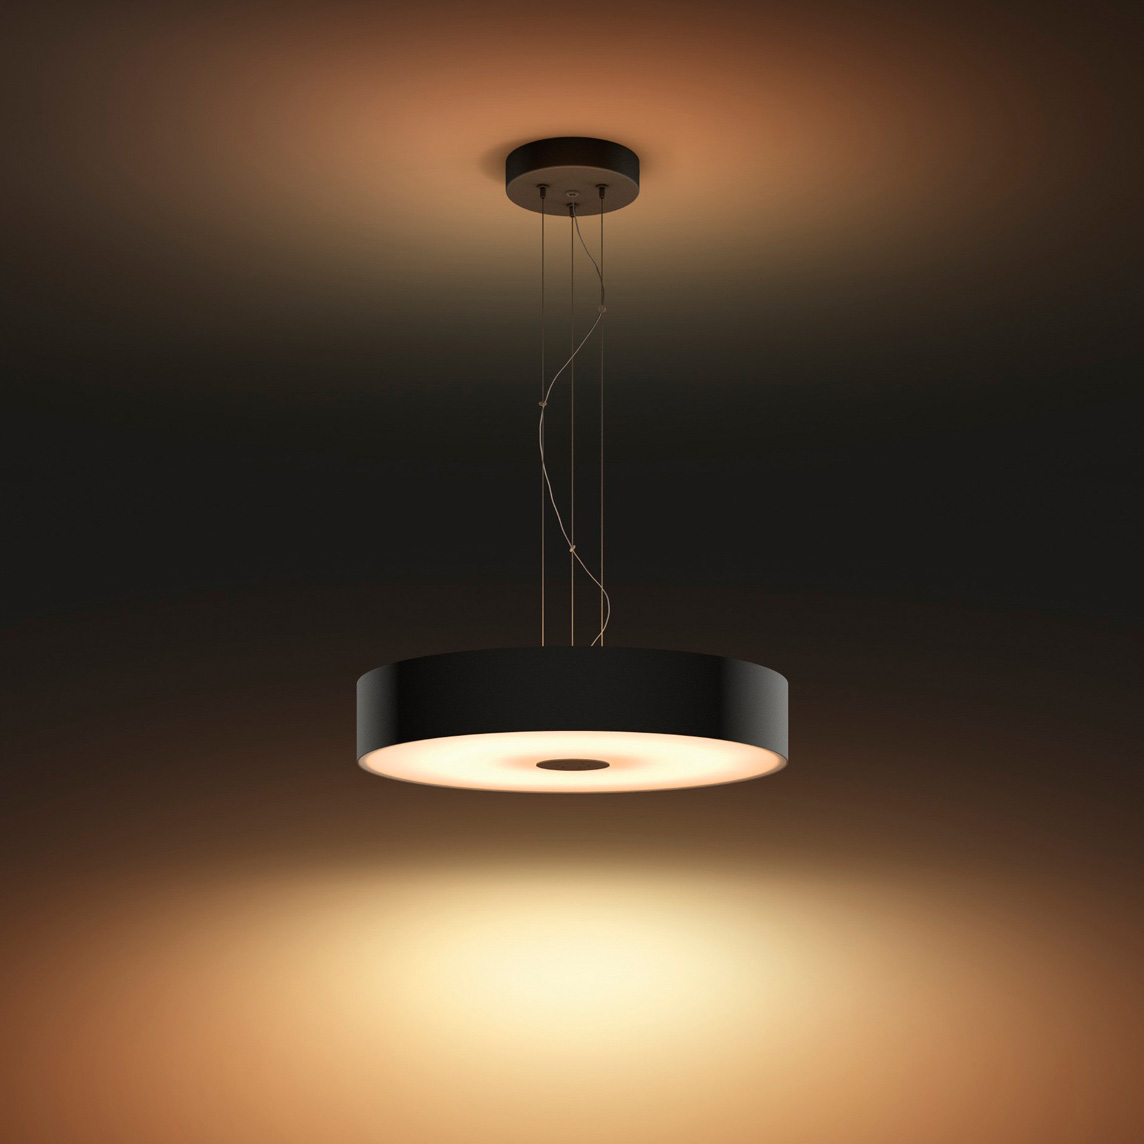 Philips Hue White Ambiance Fair LED Pendant Light black 2900lm incl. Dimmer Switch